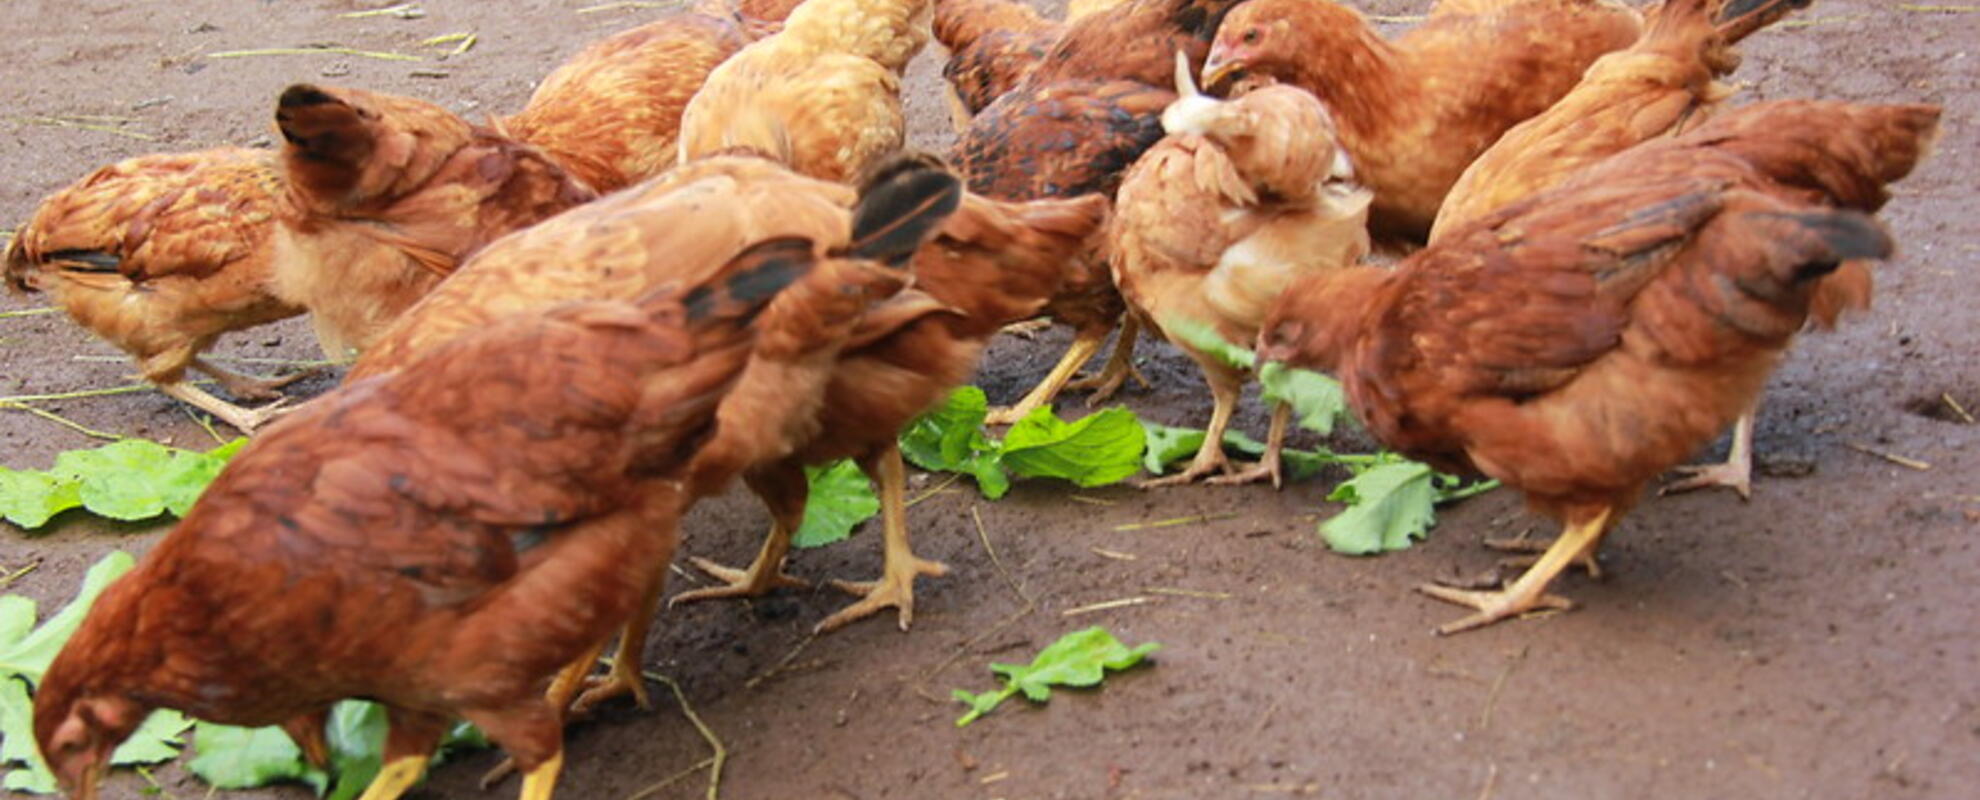 indigenous poultry breeds